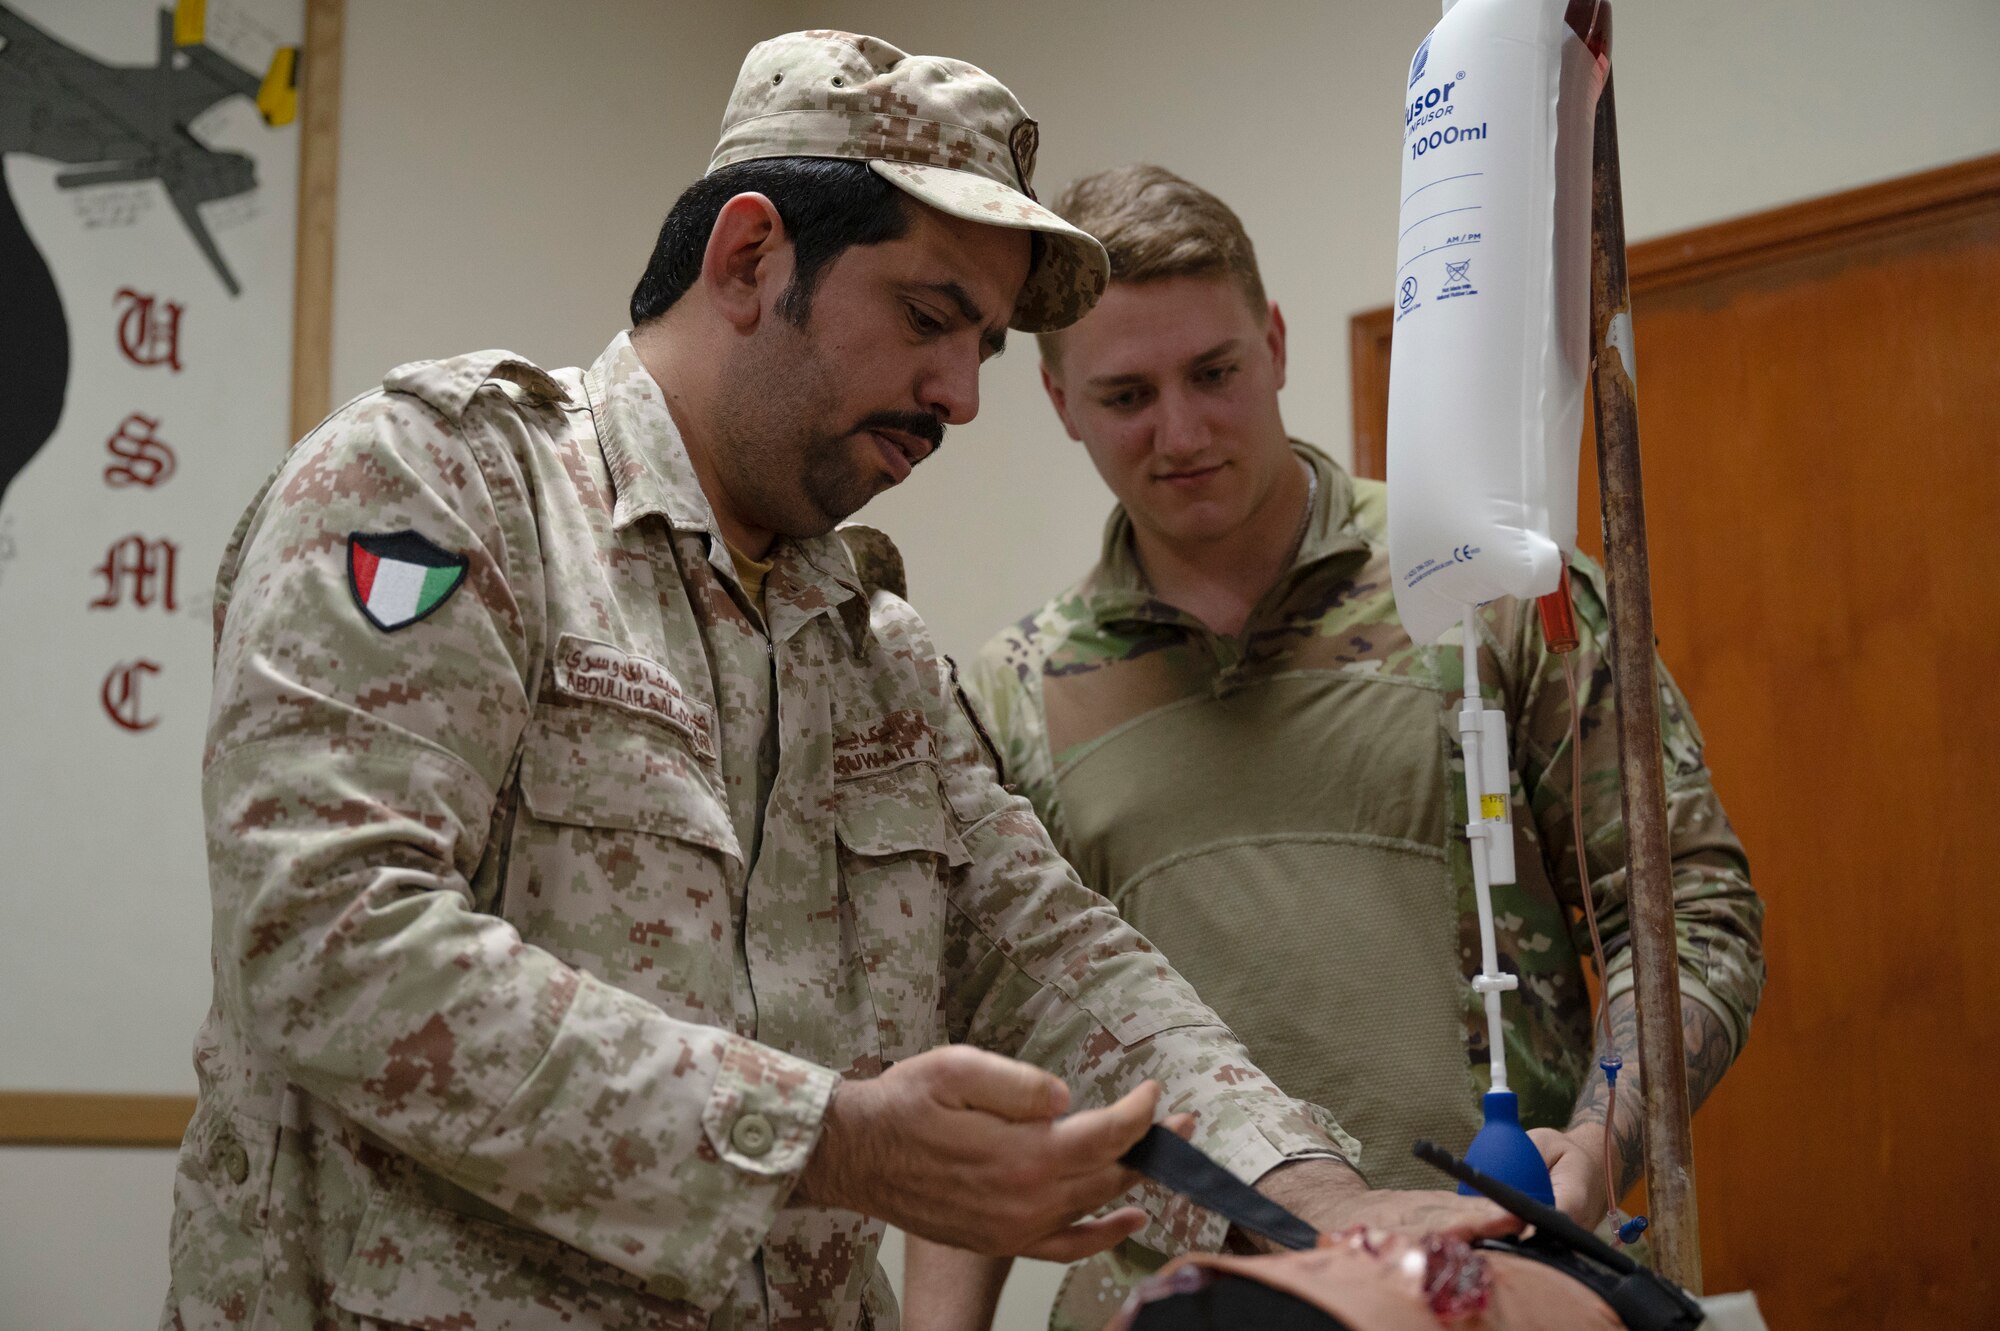 A Kuwait Army firefighter demonstrates how to properly apply a tourniquet to stop bleeding during a Tactical Combat Casualty Care class taught by Airman 1st Class Alex Moore, 386th Expeditionary Medical Squadron aerospace medical technician, September 14, 2022. During the training the firefighters volunteered for hands-on training to apply tourniquets, learning invaluable tools to save someone’s life in a crisis situation. (U.S. Air Force photo by Staff Sgt. Dalton Williams)